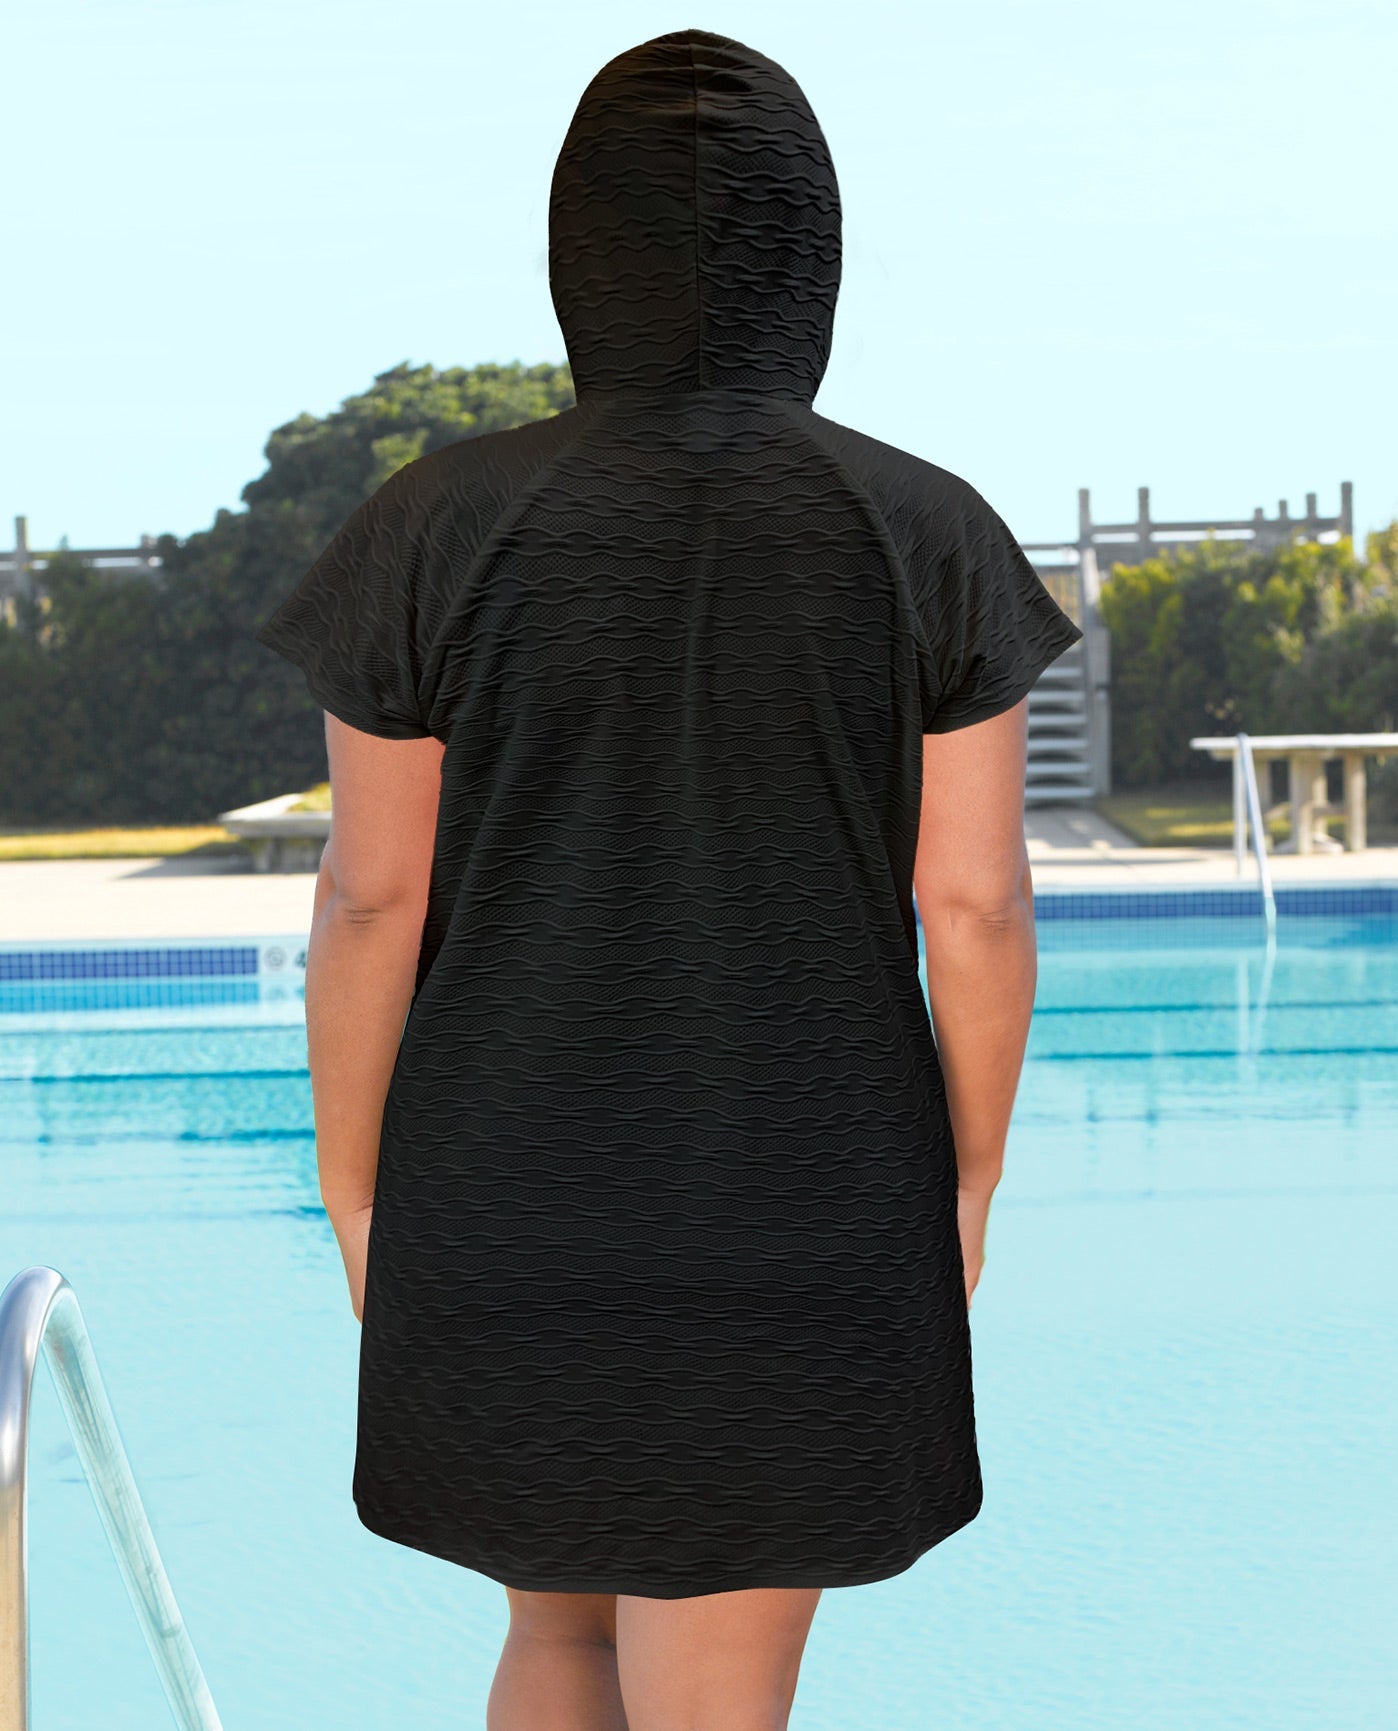 HOOD UP BACK VIEW OF AQUAMORE SOLID TEXTURED ZIPPER HOODIE PLUS SIZE COVER UP TUNIC | 017 AQM TEXTURED BLACK